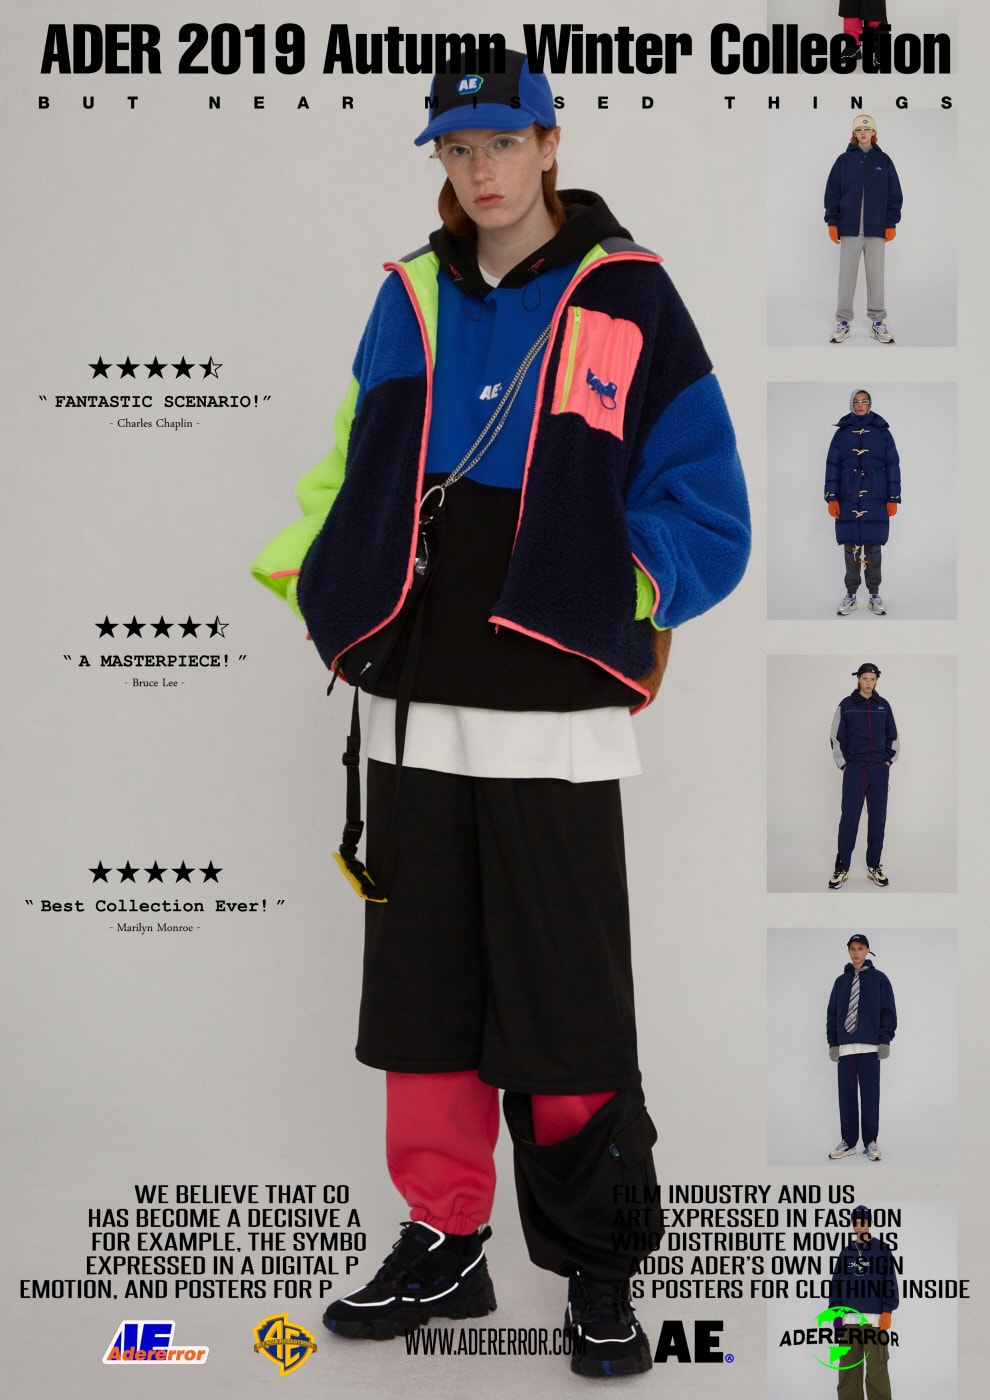 ader error fall winter collection film in fashion outerwear puffer coats jackets sweaters korean streetwear brand